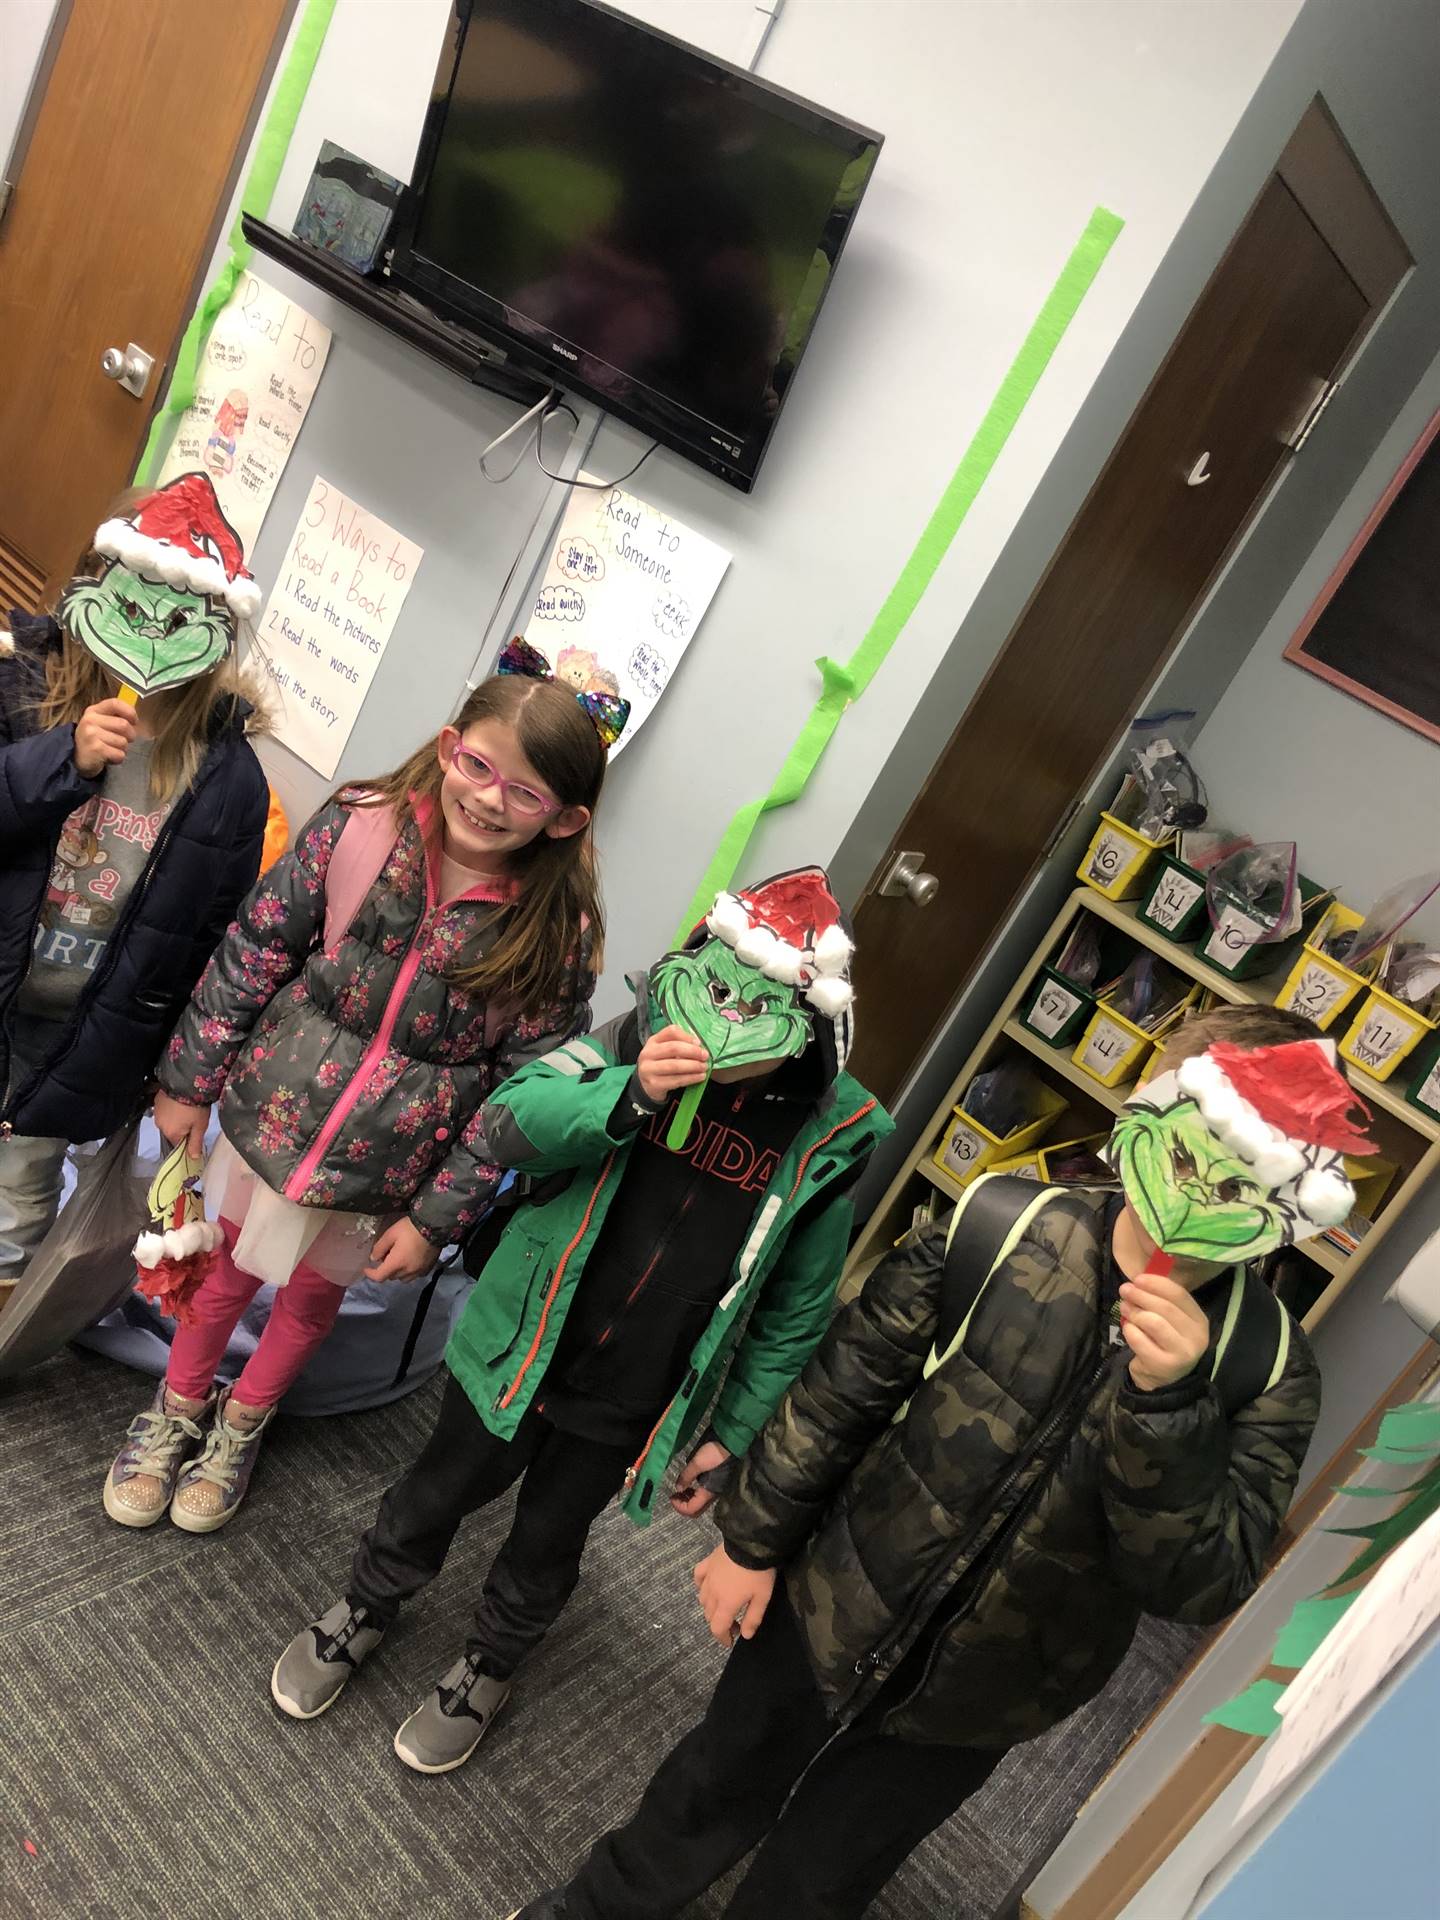 Our Grinch masks turned out great!